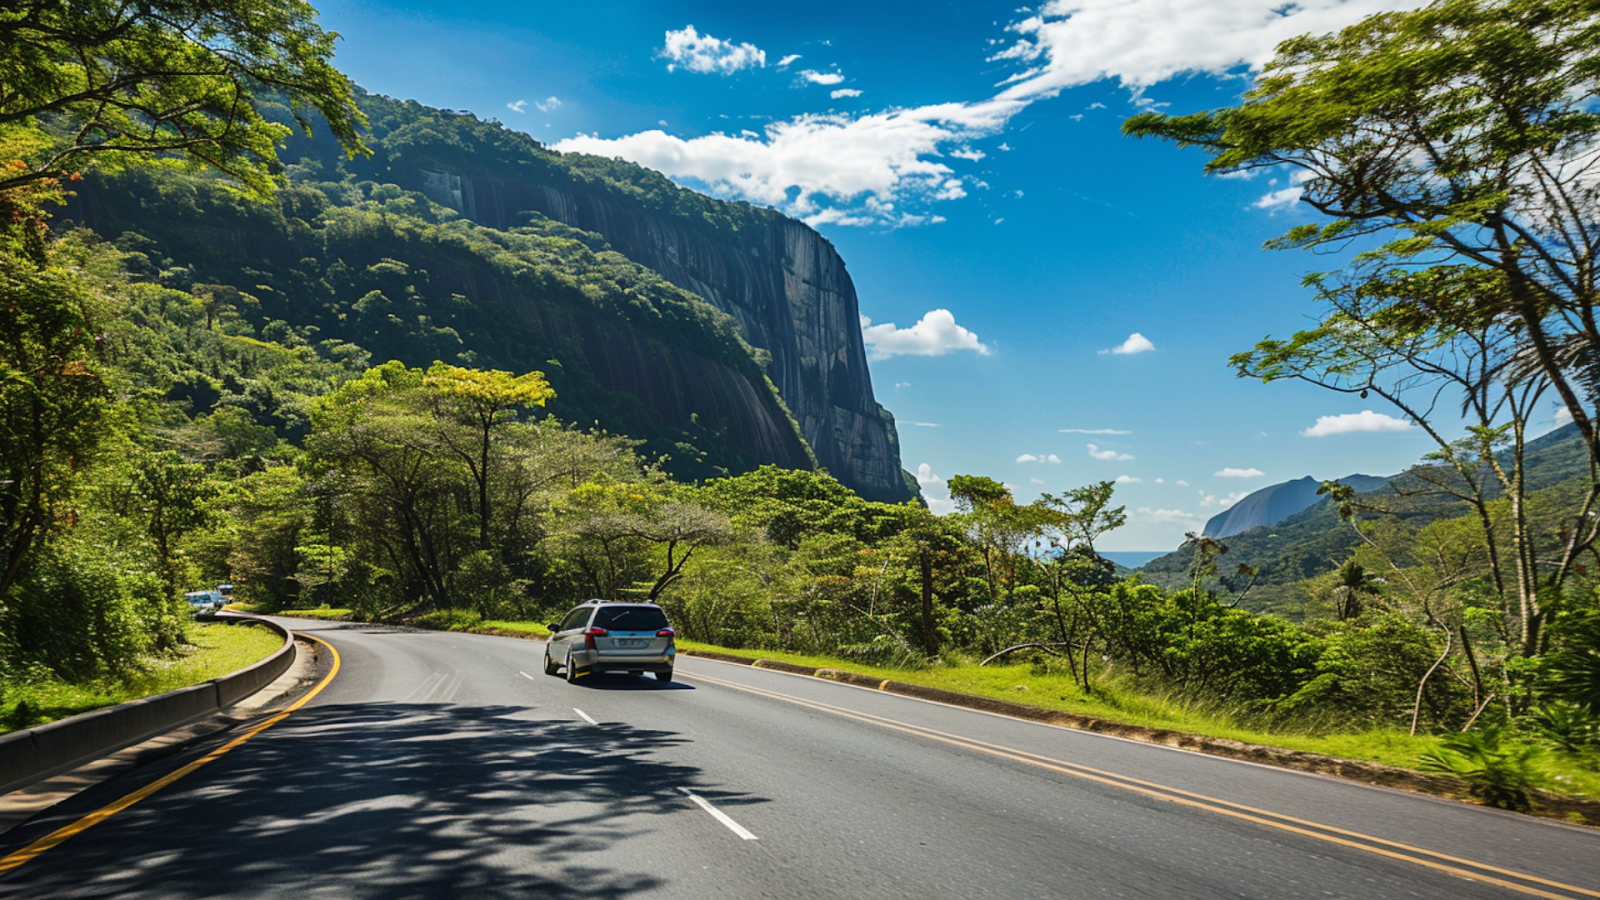 A scenic driving route heading to the mountains in Sao Paulo